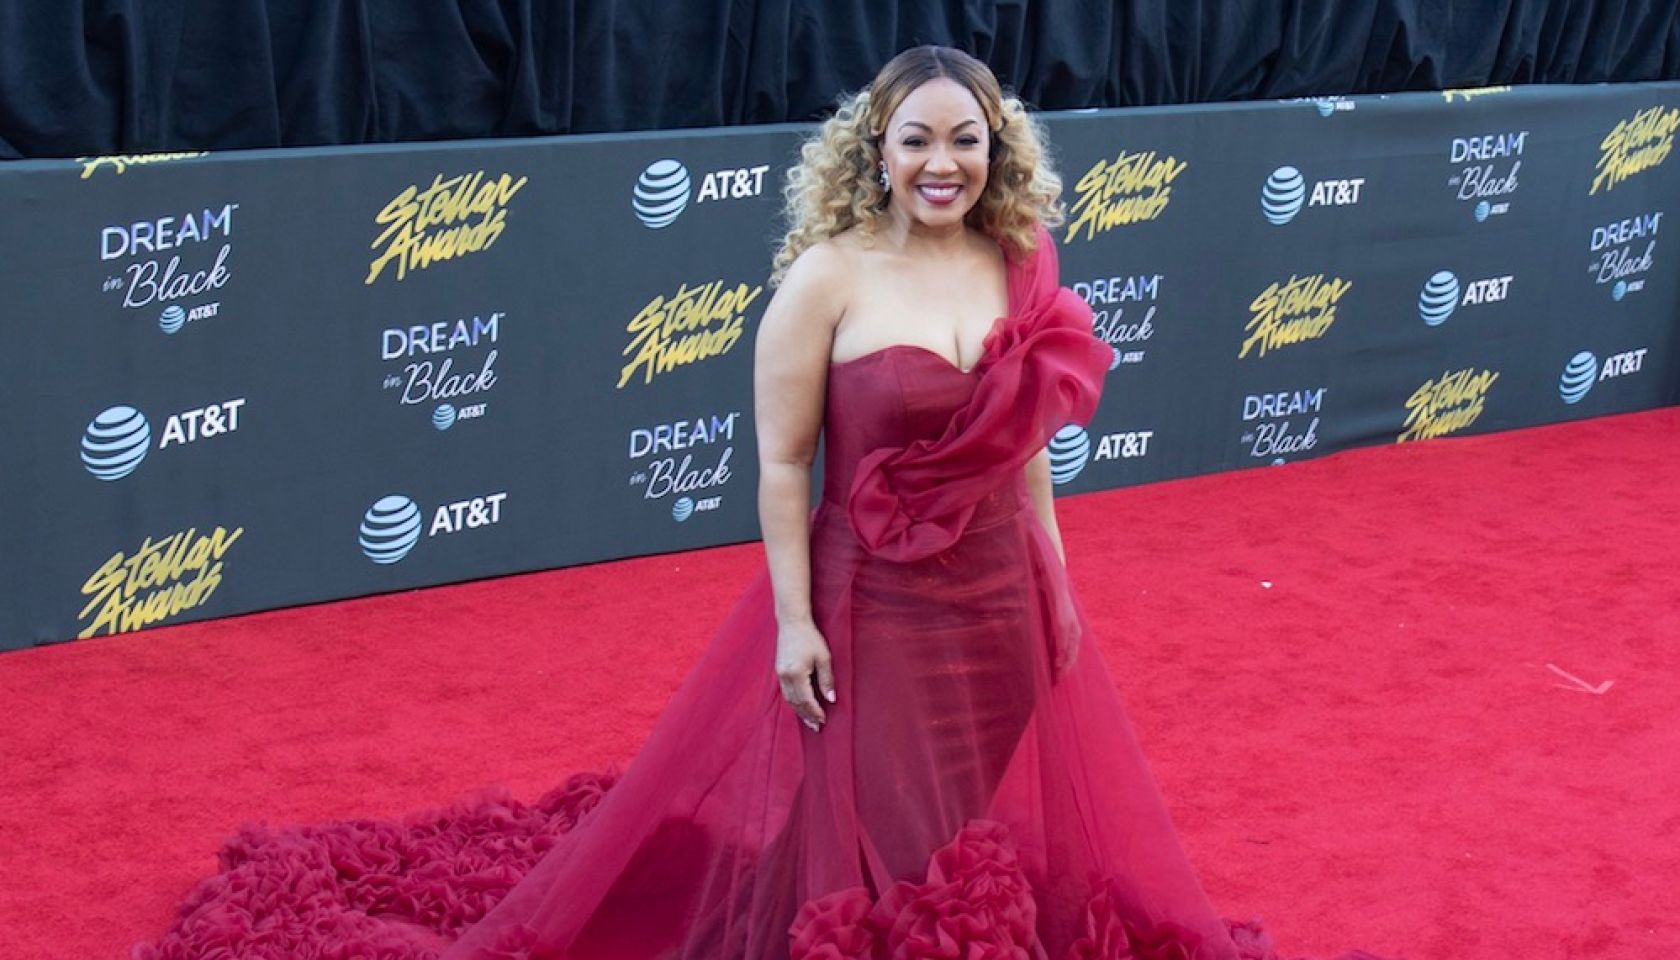 Erica Campbell Shares The Backstory To Her Love Of Hair